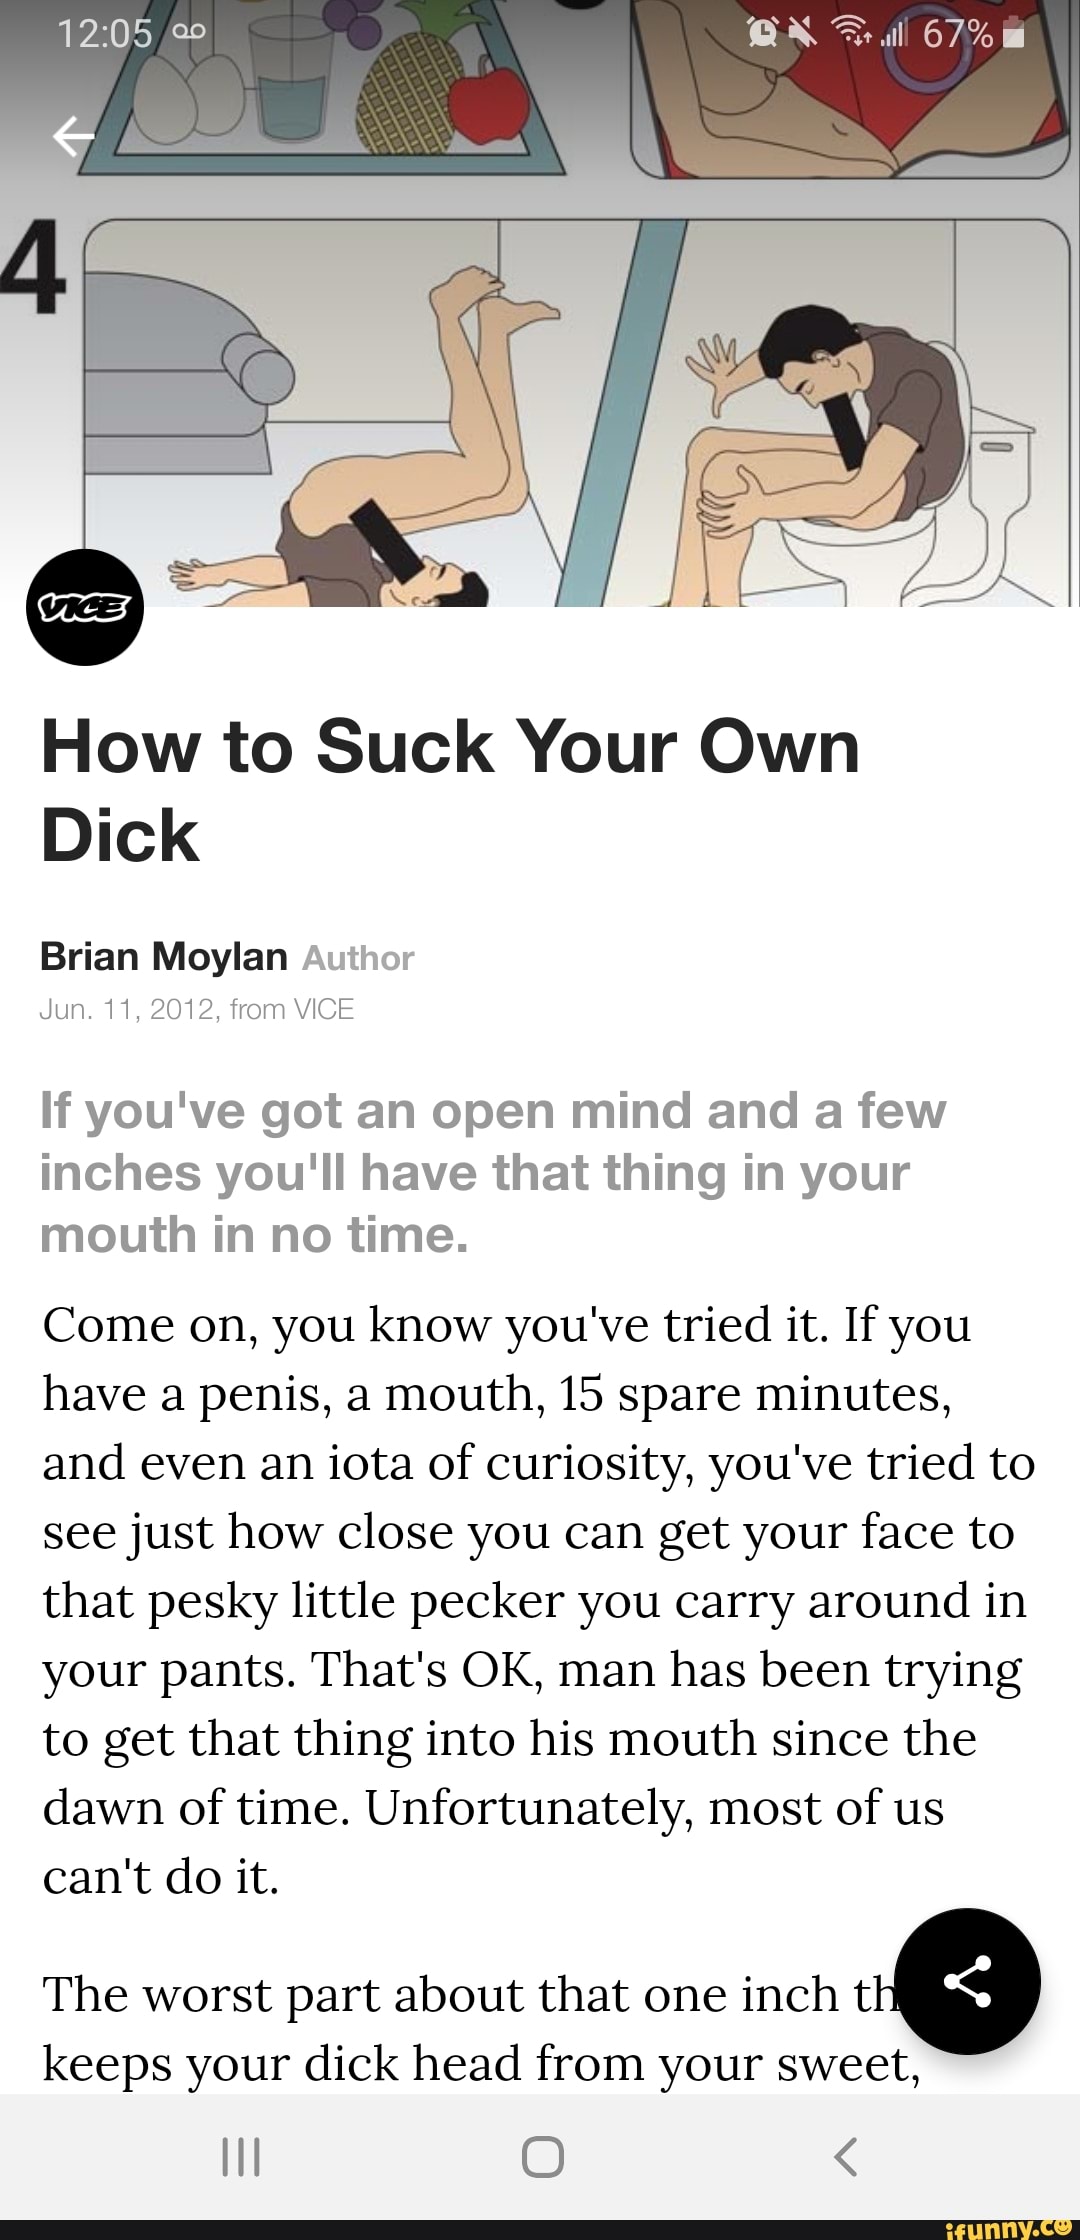 Does sucking you own dick make you guy